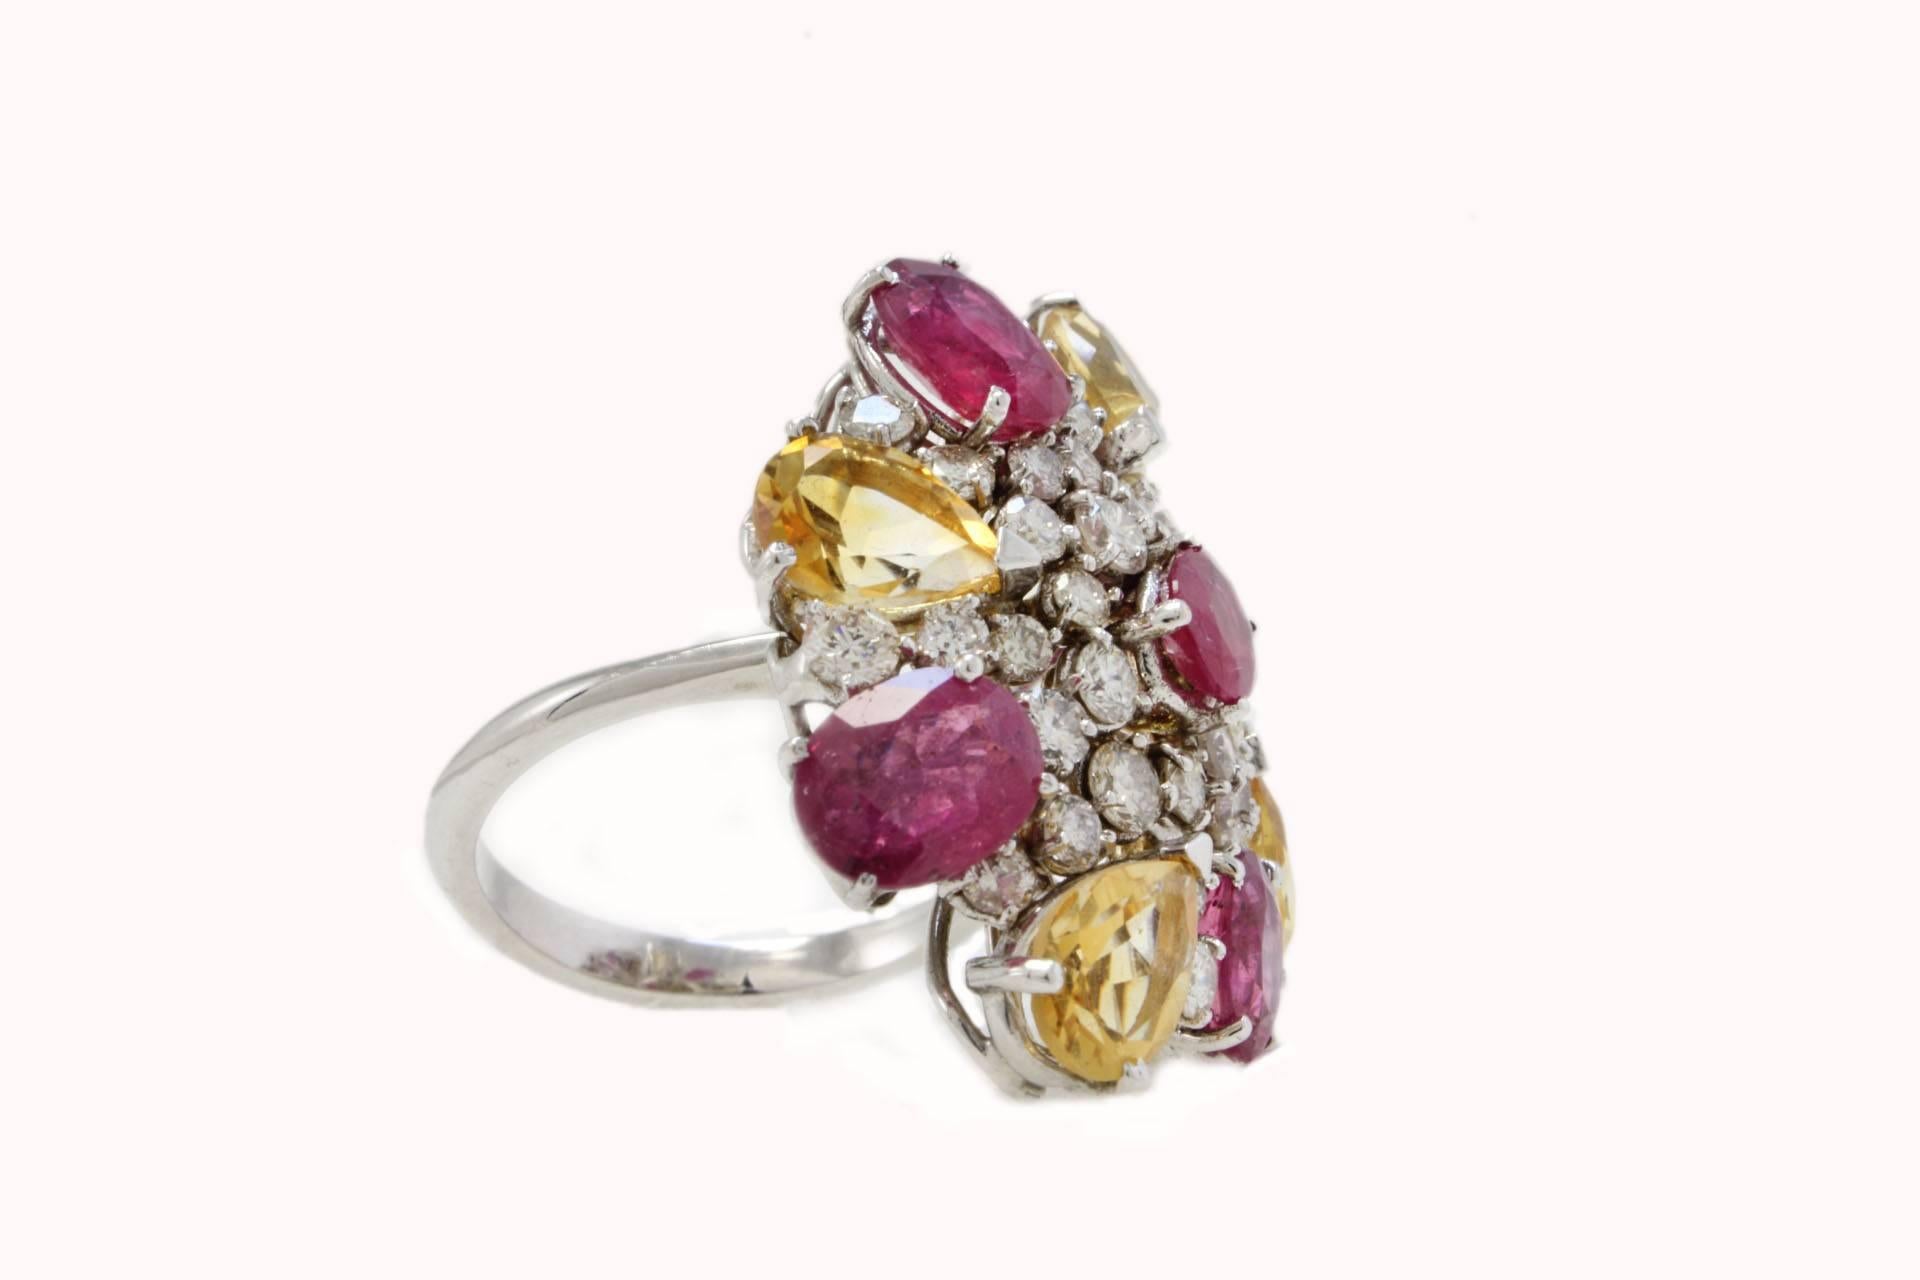 Shiny cocktail ring composed of a flower of citrines alternating with rubies, all around sparkling diamonds. All is mounted in 14 Kt white gold.
Tot Weight 12.35 g
Ring Size : ITA 14 - French 54 - US 6.5 - UK N
Diamonds 2.40 ct
Citrin and rubies